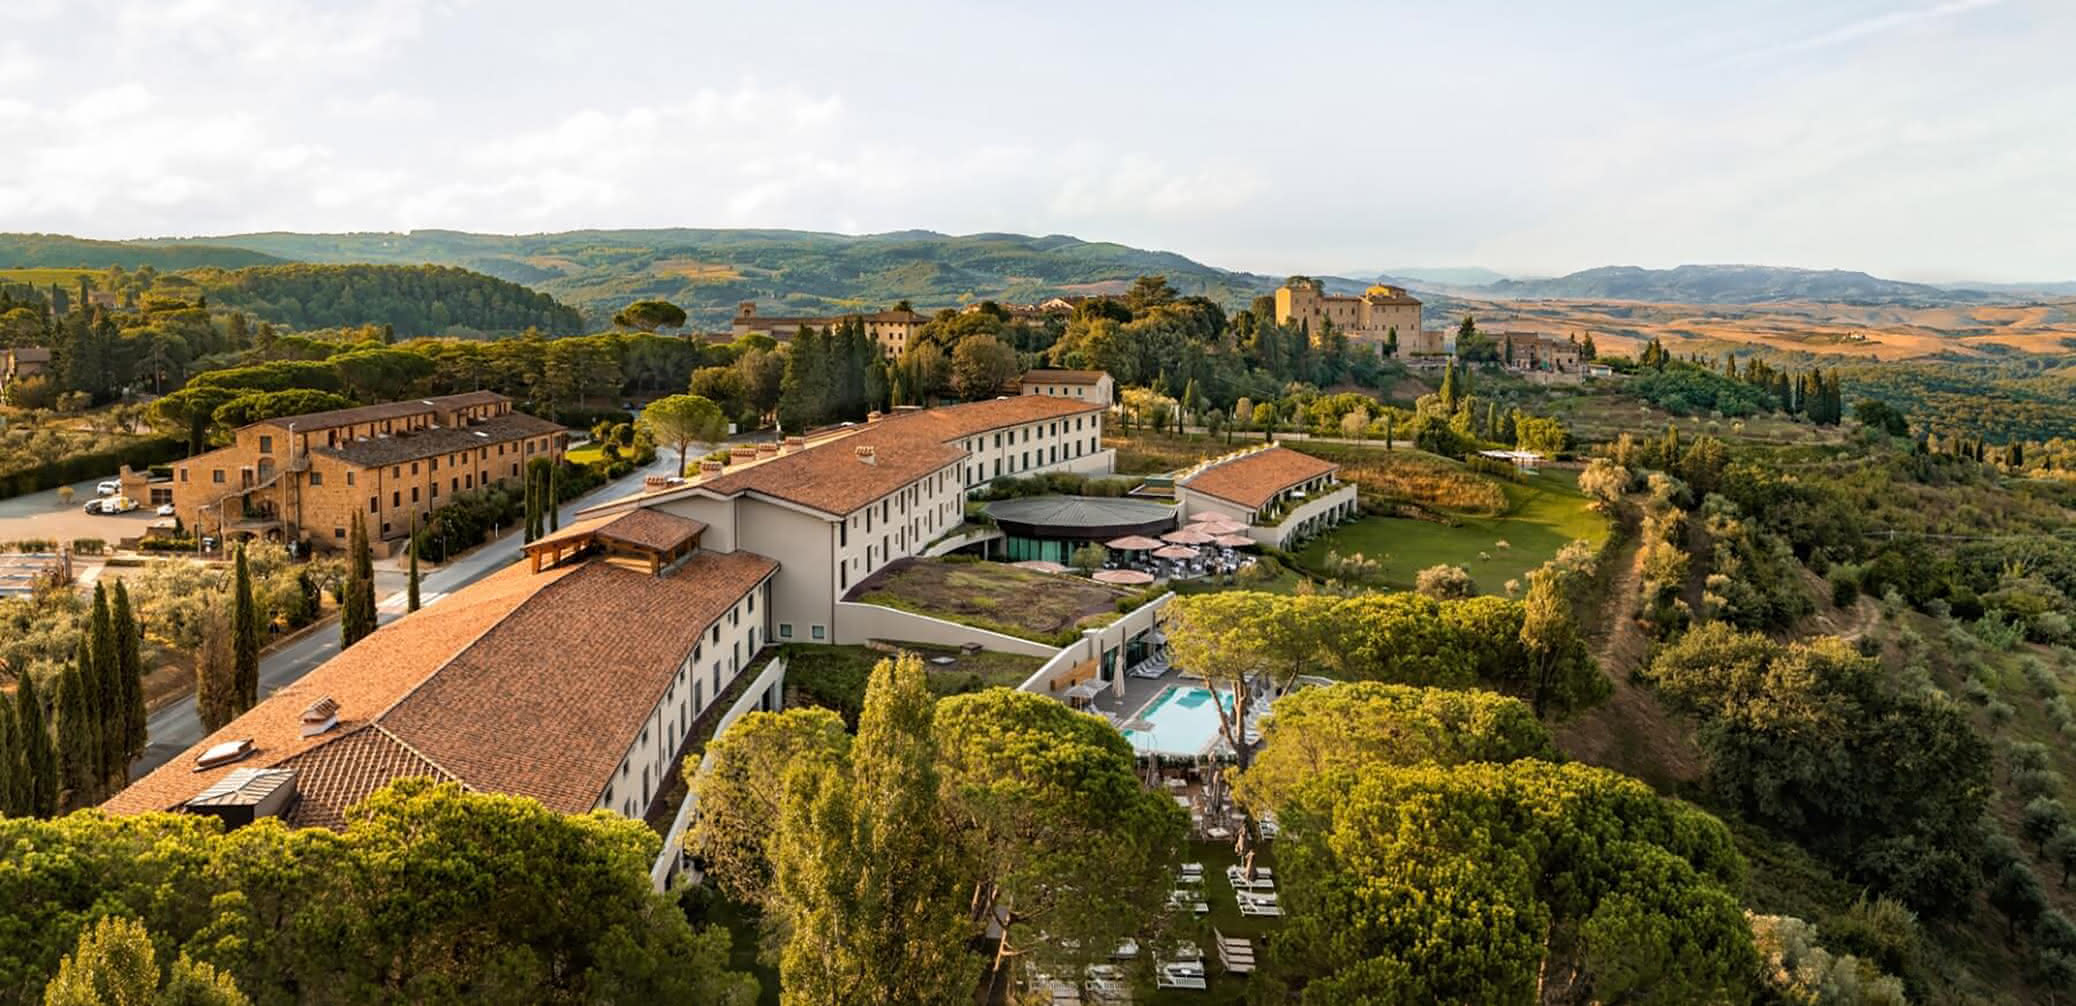 is-there-ritz-carlton-in-tuscany